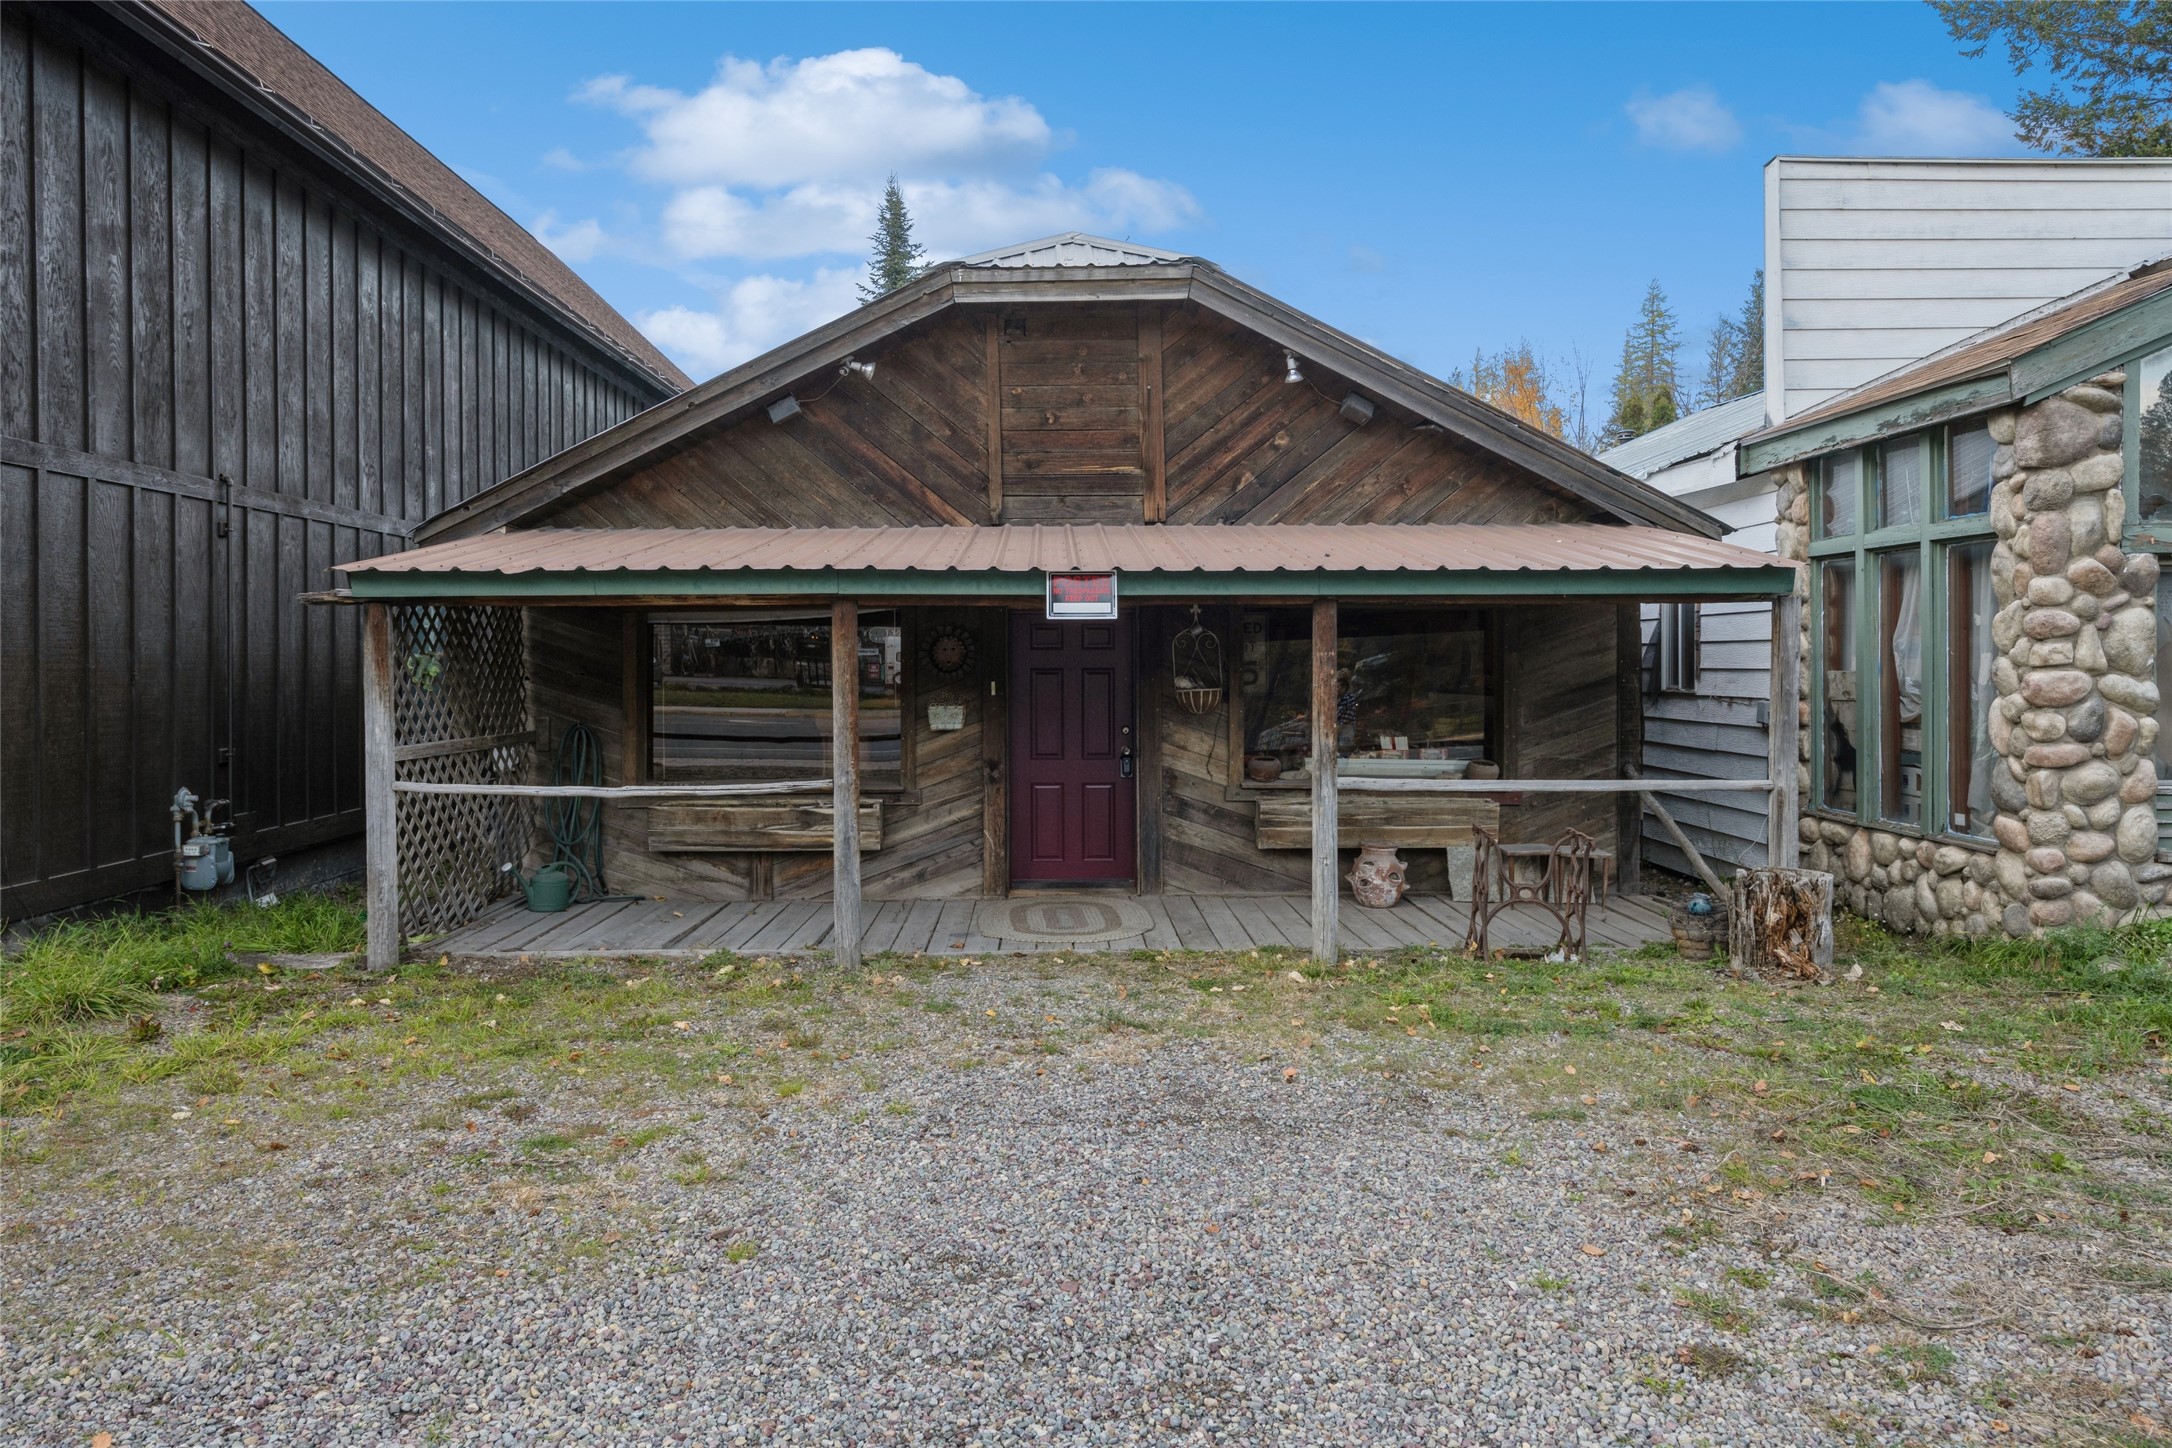 Here's an opportunity to own a little bit of Hungry Horse history! This historic log home used to be Frankie's Spillway Bar! It is minutes from Glacier National Park.  Bring your vision; this has unlimited potential—scenic corridor zoning!  The  Highway 2 East frontage has an average traffic count of over 8800 cars daily. The property is being sold in its present condition - As Is Where Is.  The seller is the estate's personal representative and a licensed real estate broker. Please call Dan Erickson at 406-261-5318, Jill Hinrichs at 406-253-0676, or your real estate professional.